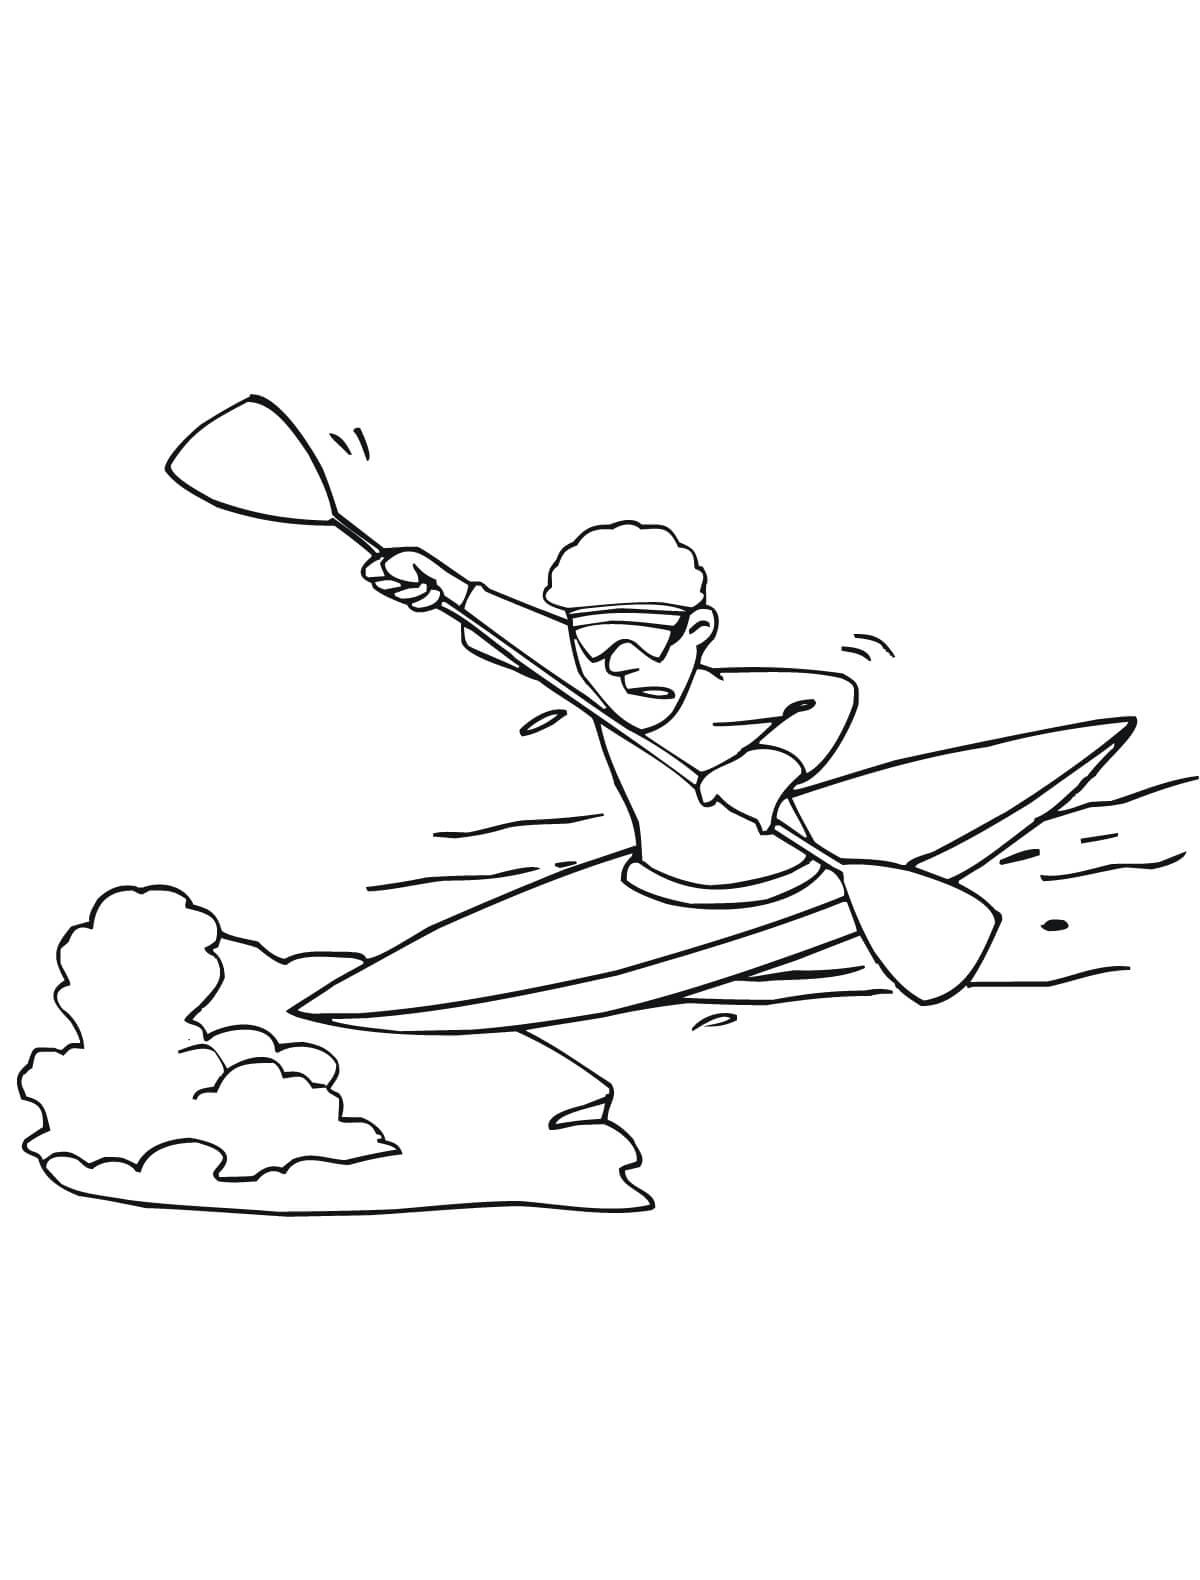 kayak coloring pages